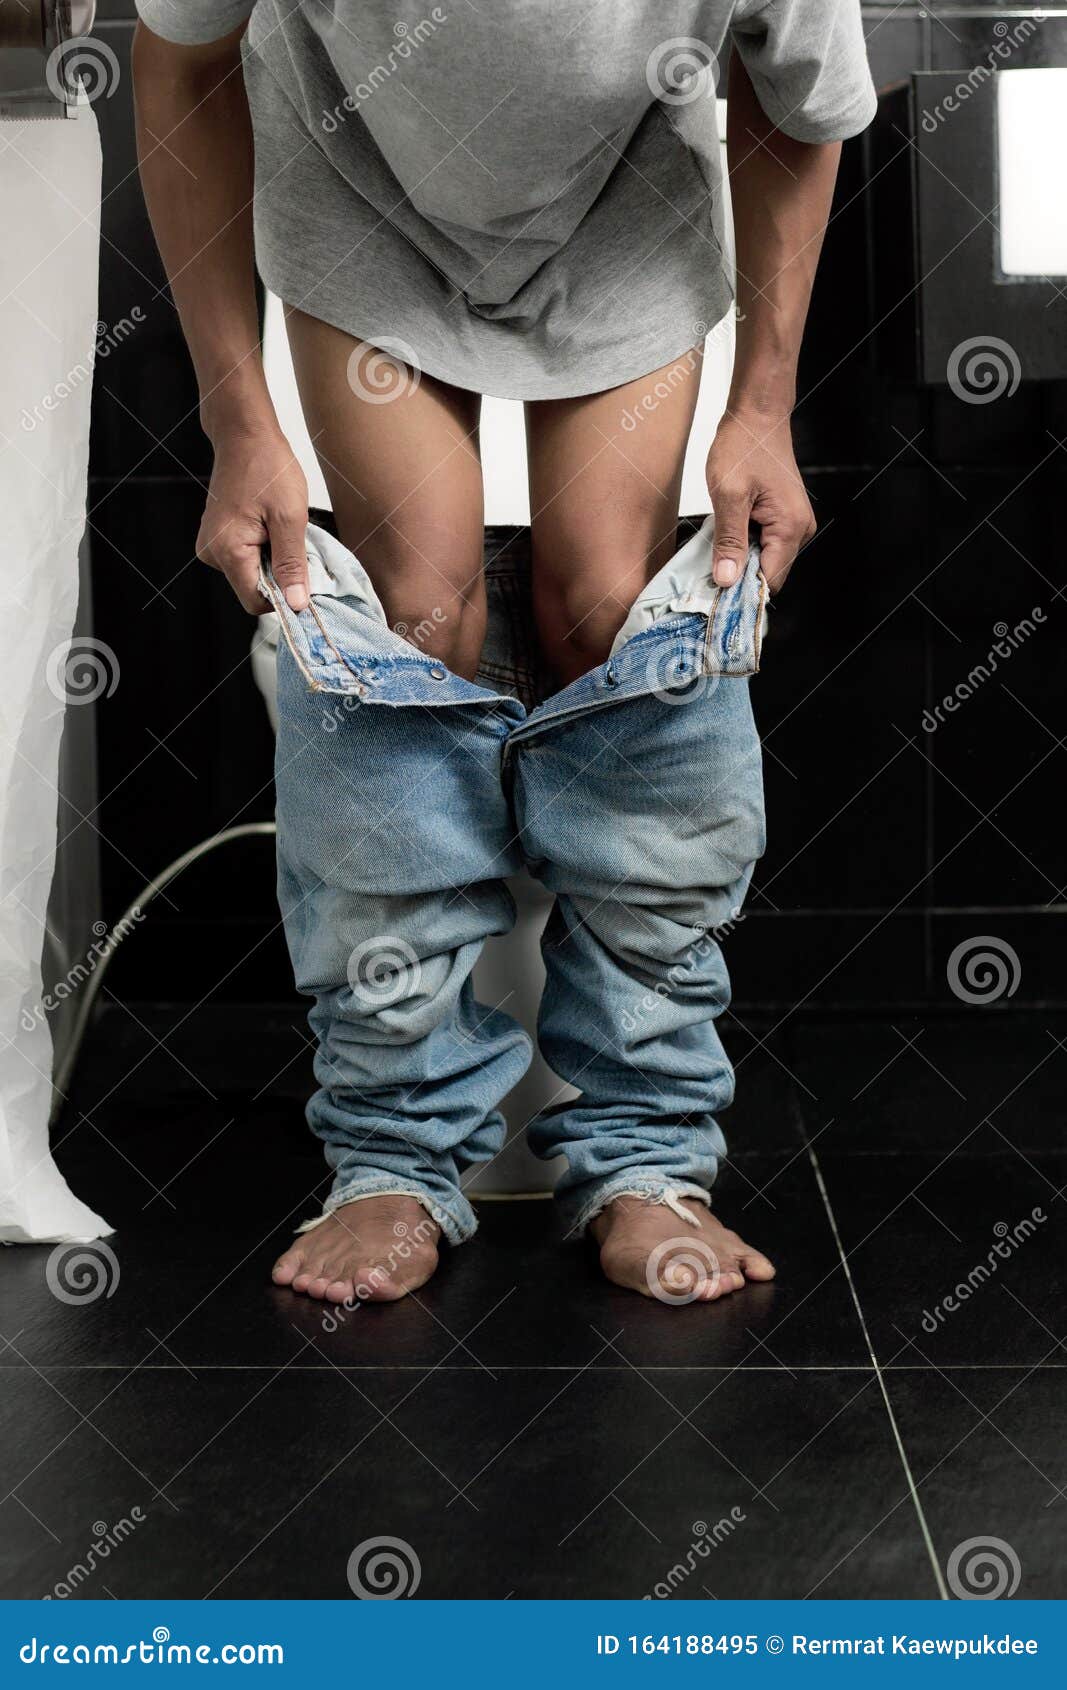 Man Removing His Underwear in Bathroom Stock Image - Image of hold, pipes:  164188495